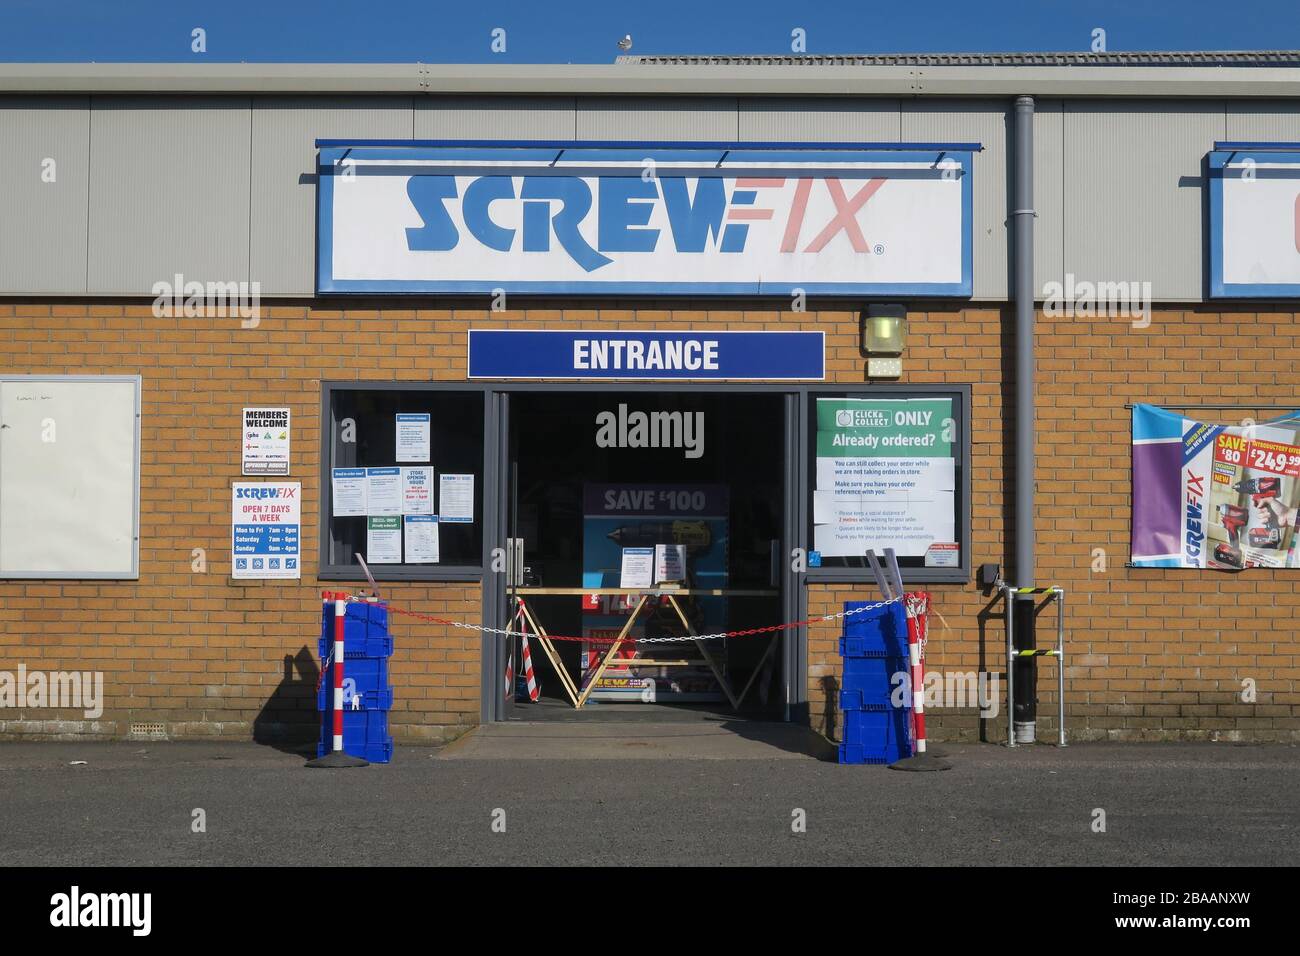 Restrictions put in place at ScrewFix during the Coronavirus (Covid 19) outbreak Stock Photo